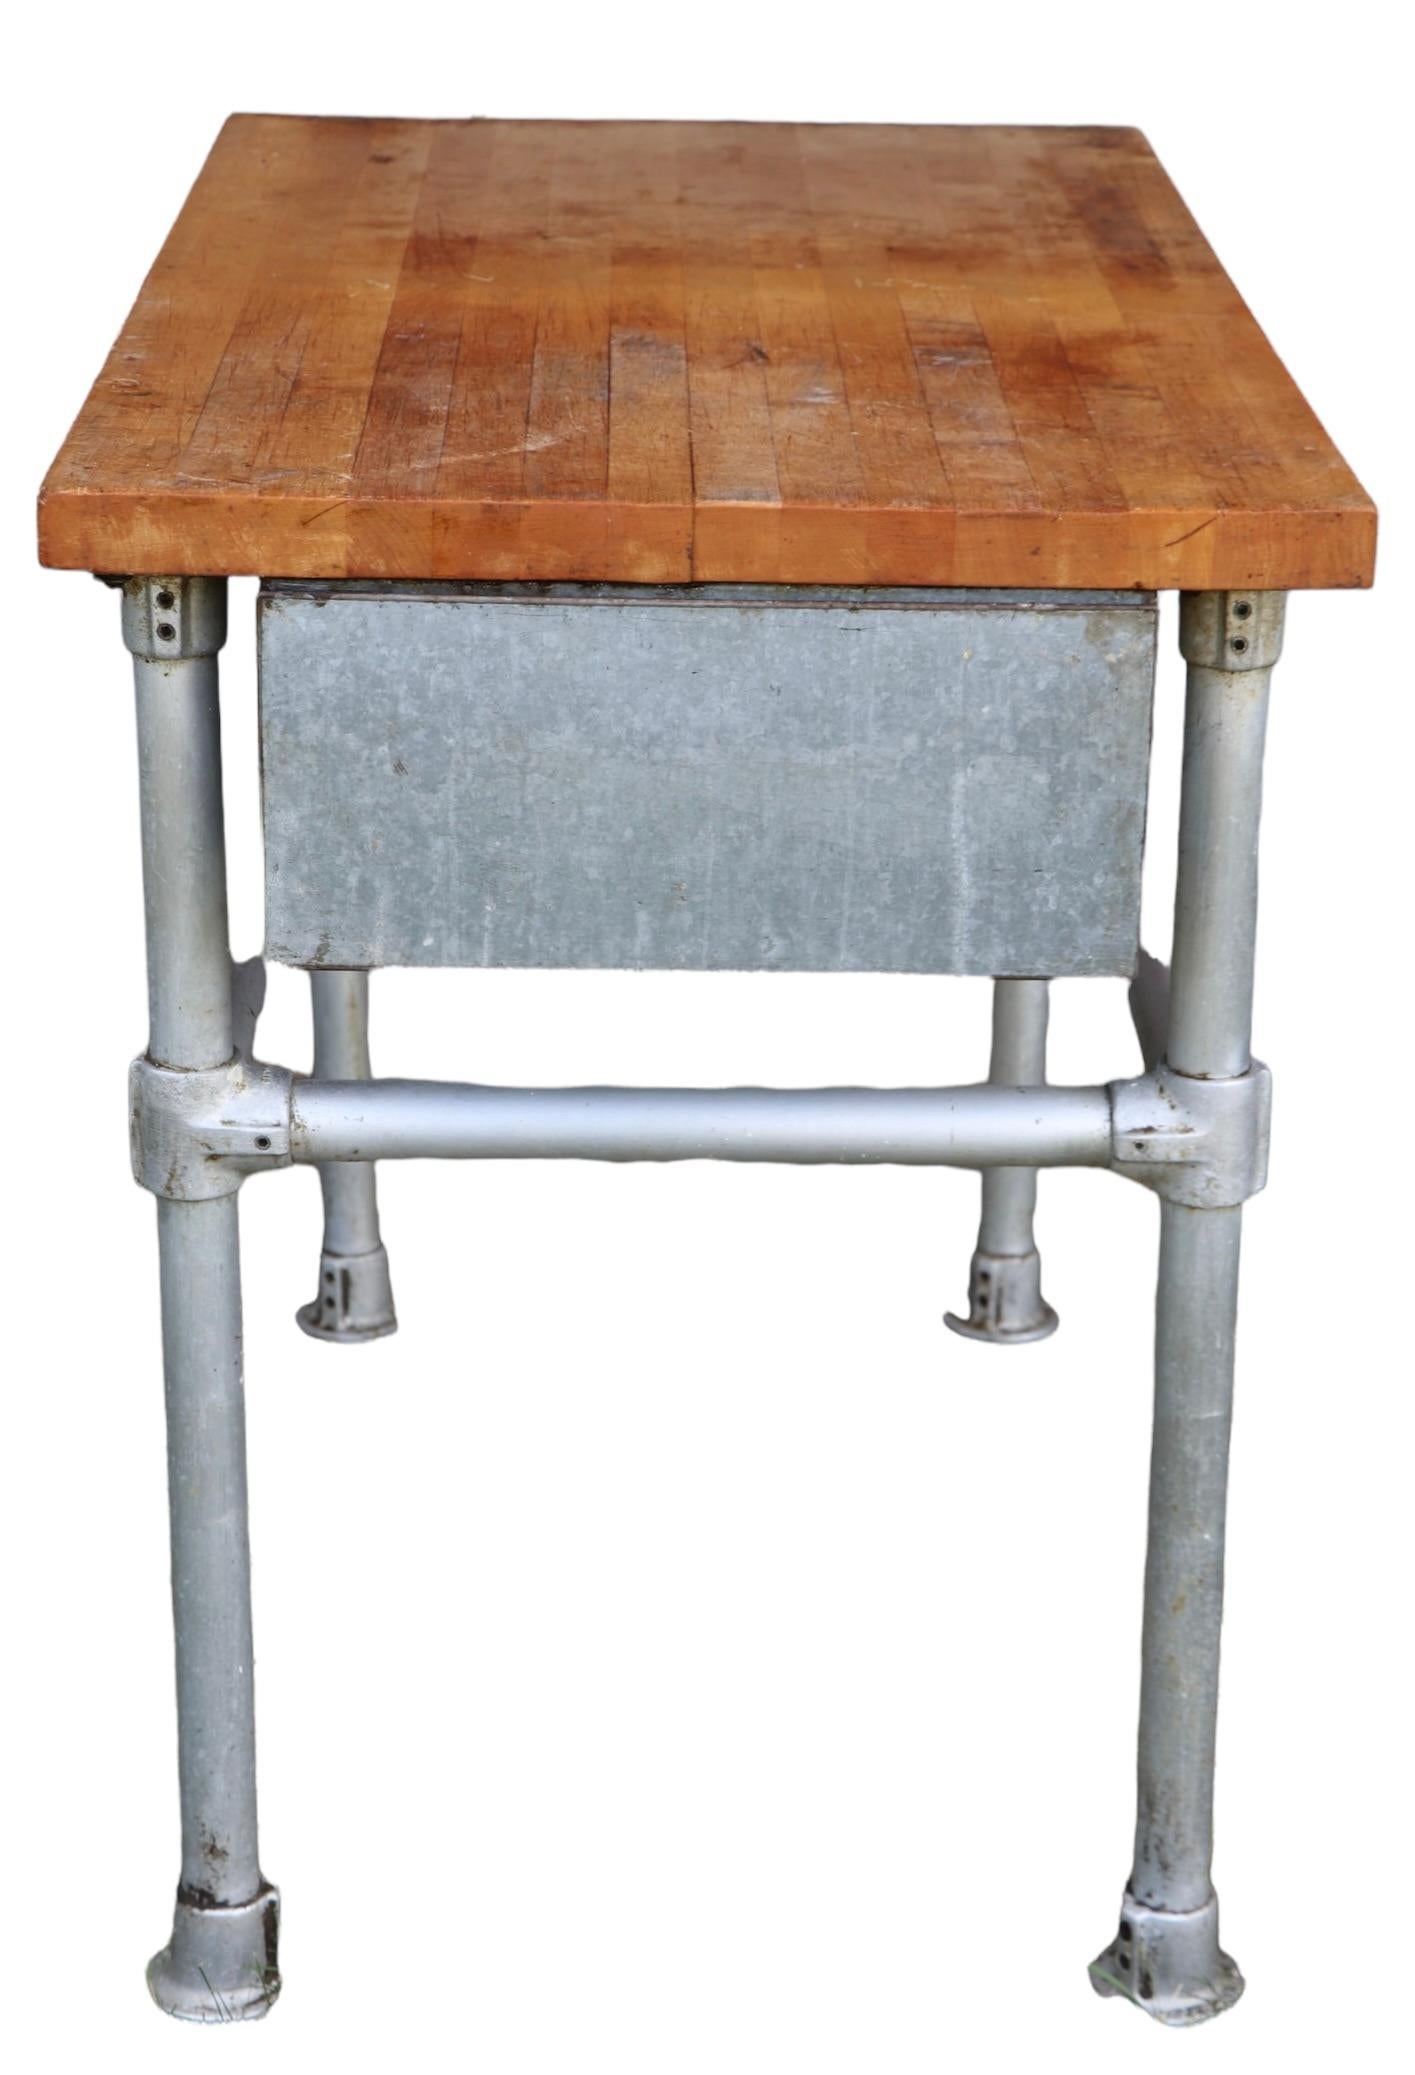 Commercial Butcher Block and Iron Work Table with Storage Drawer  11